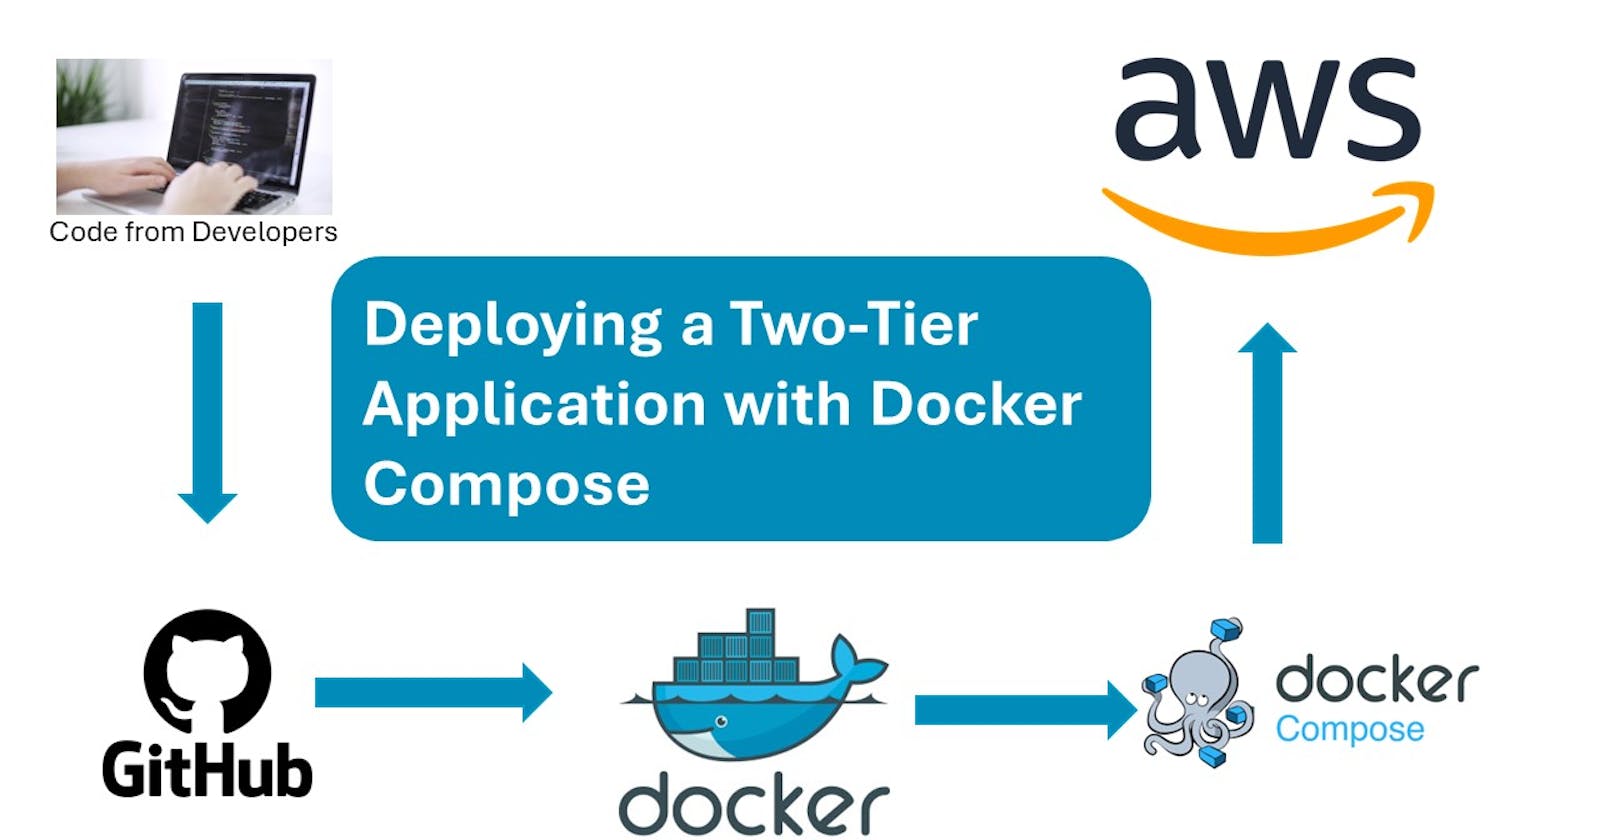 Deploying a Two-Tier Application with Docker Compose